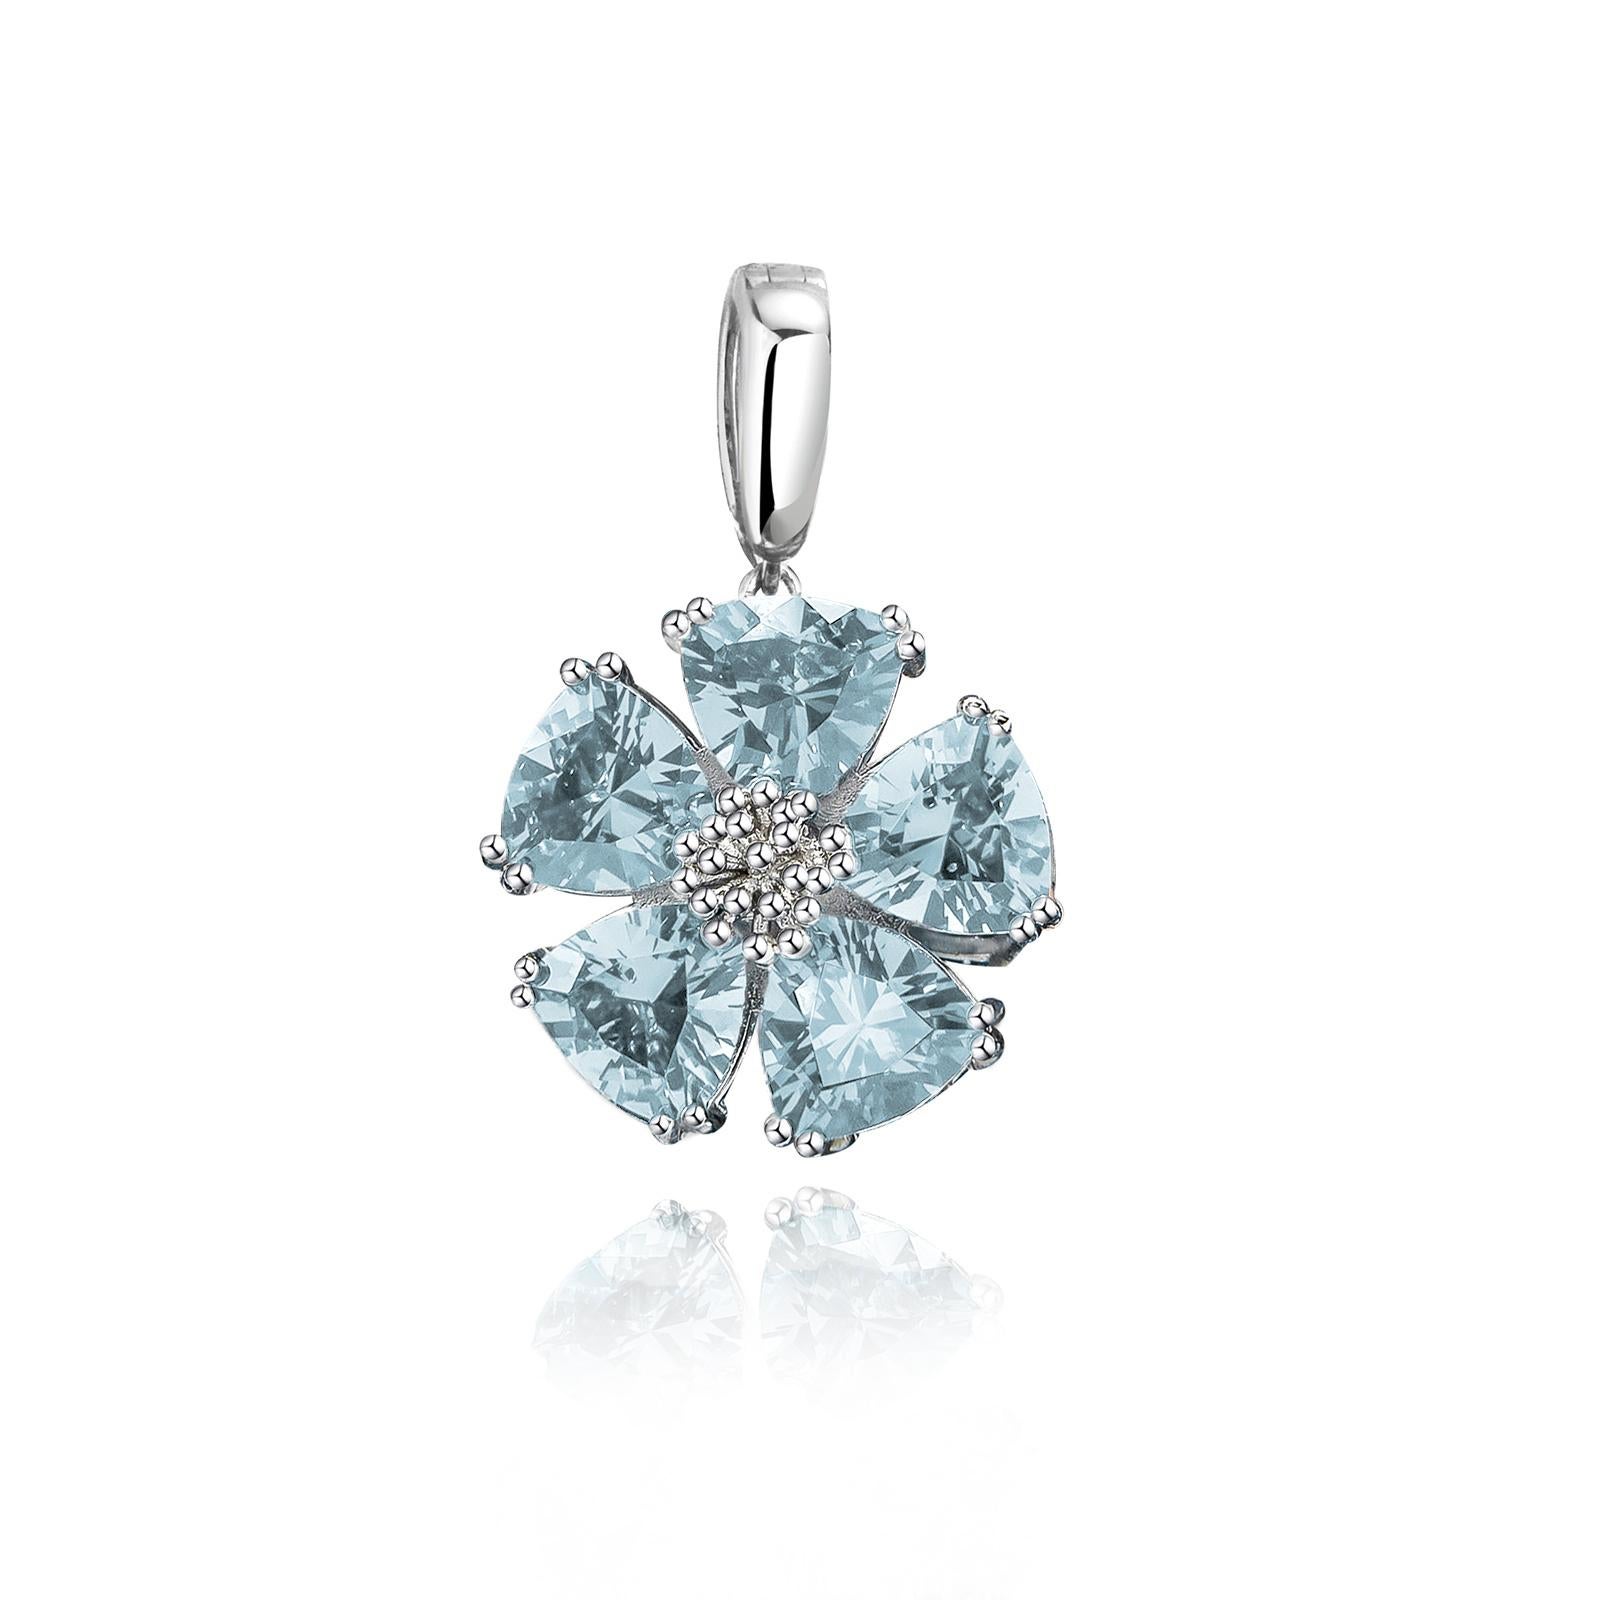 Designed in NYC

.925 Sterling Silver 5 x 7 mm Dark Blue Topaz Blossom Stone Pendant. No matter the season, allow natural beauty to surround you wherever you go. Blossom stone pendant: 

Sterling silver 
High-polish finish
Light-weight 
20 mm